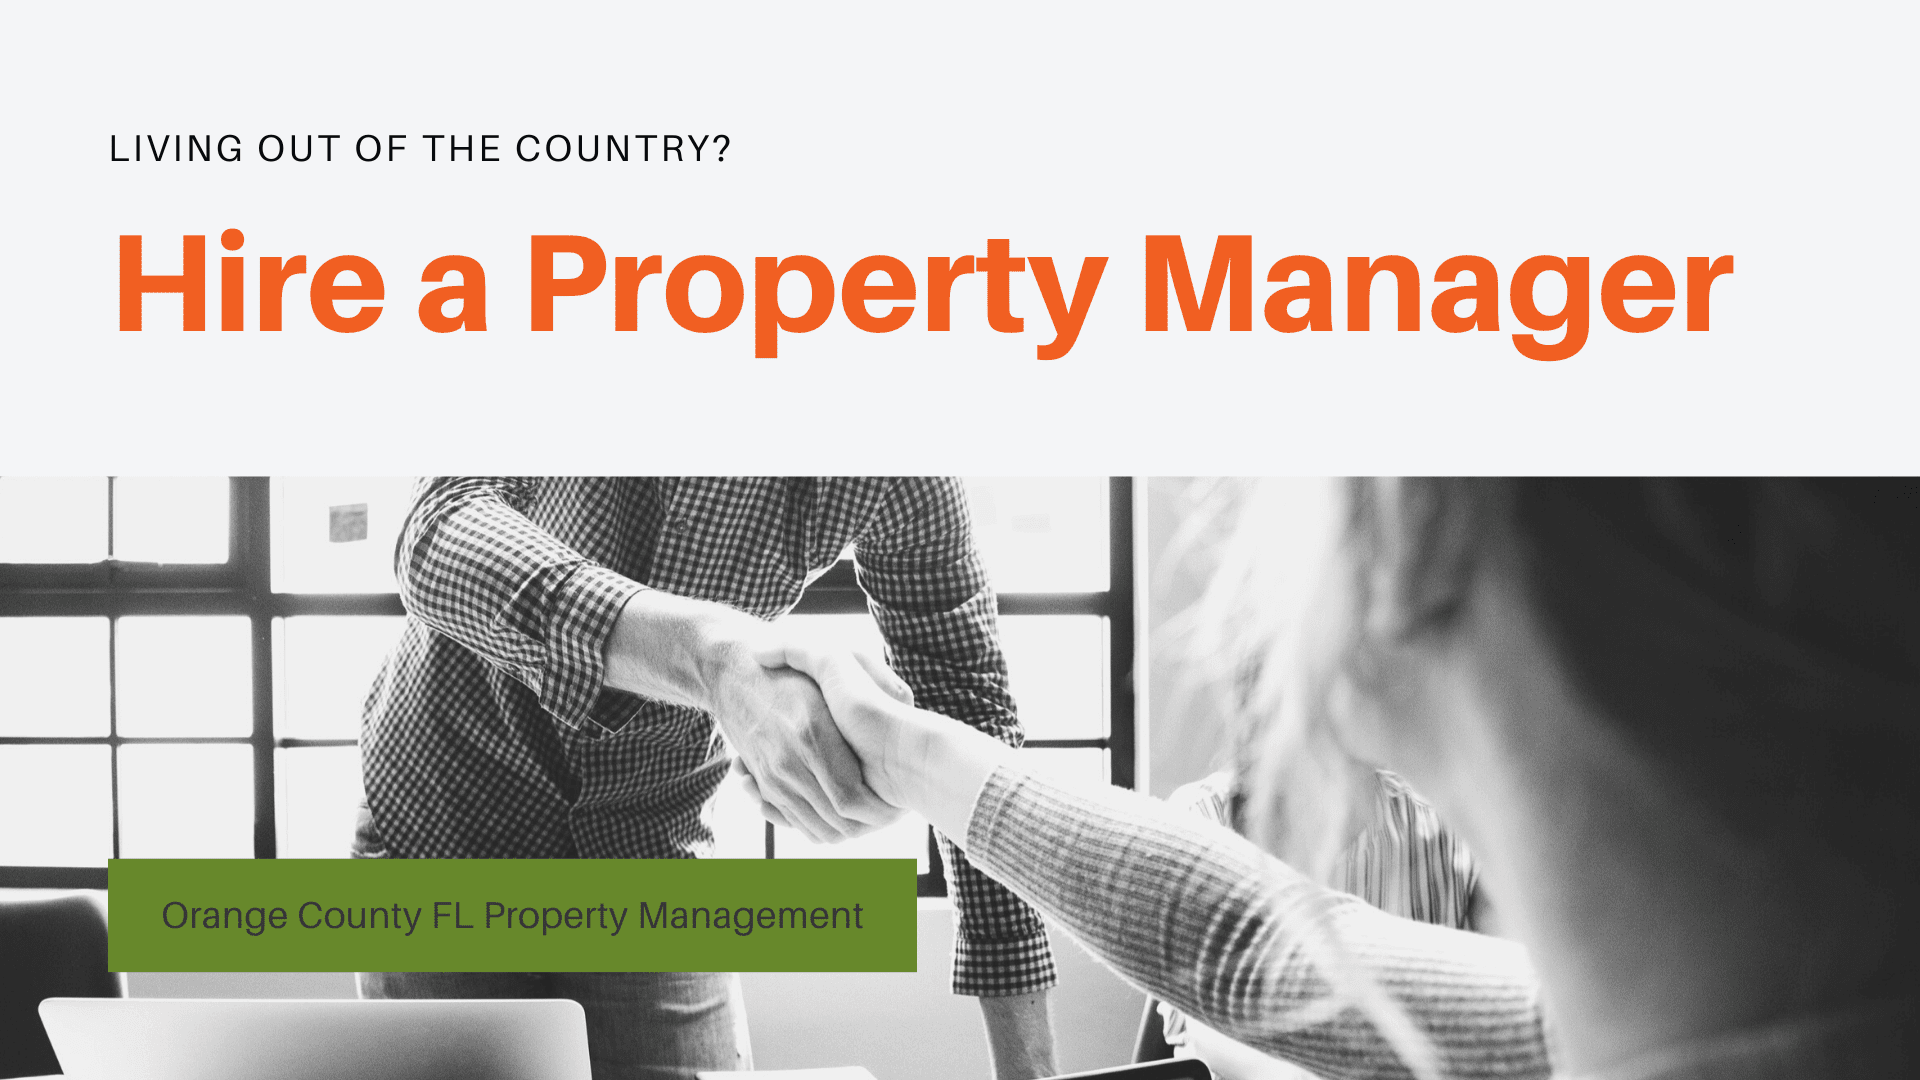 Living Out of the Country? Hire an Orange County FL Property Management Company